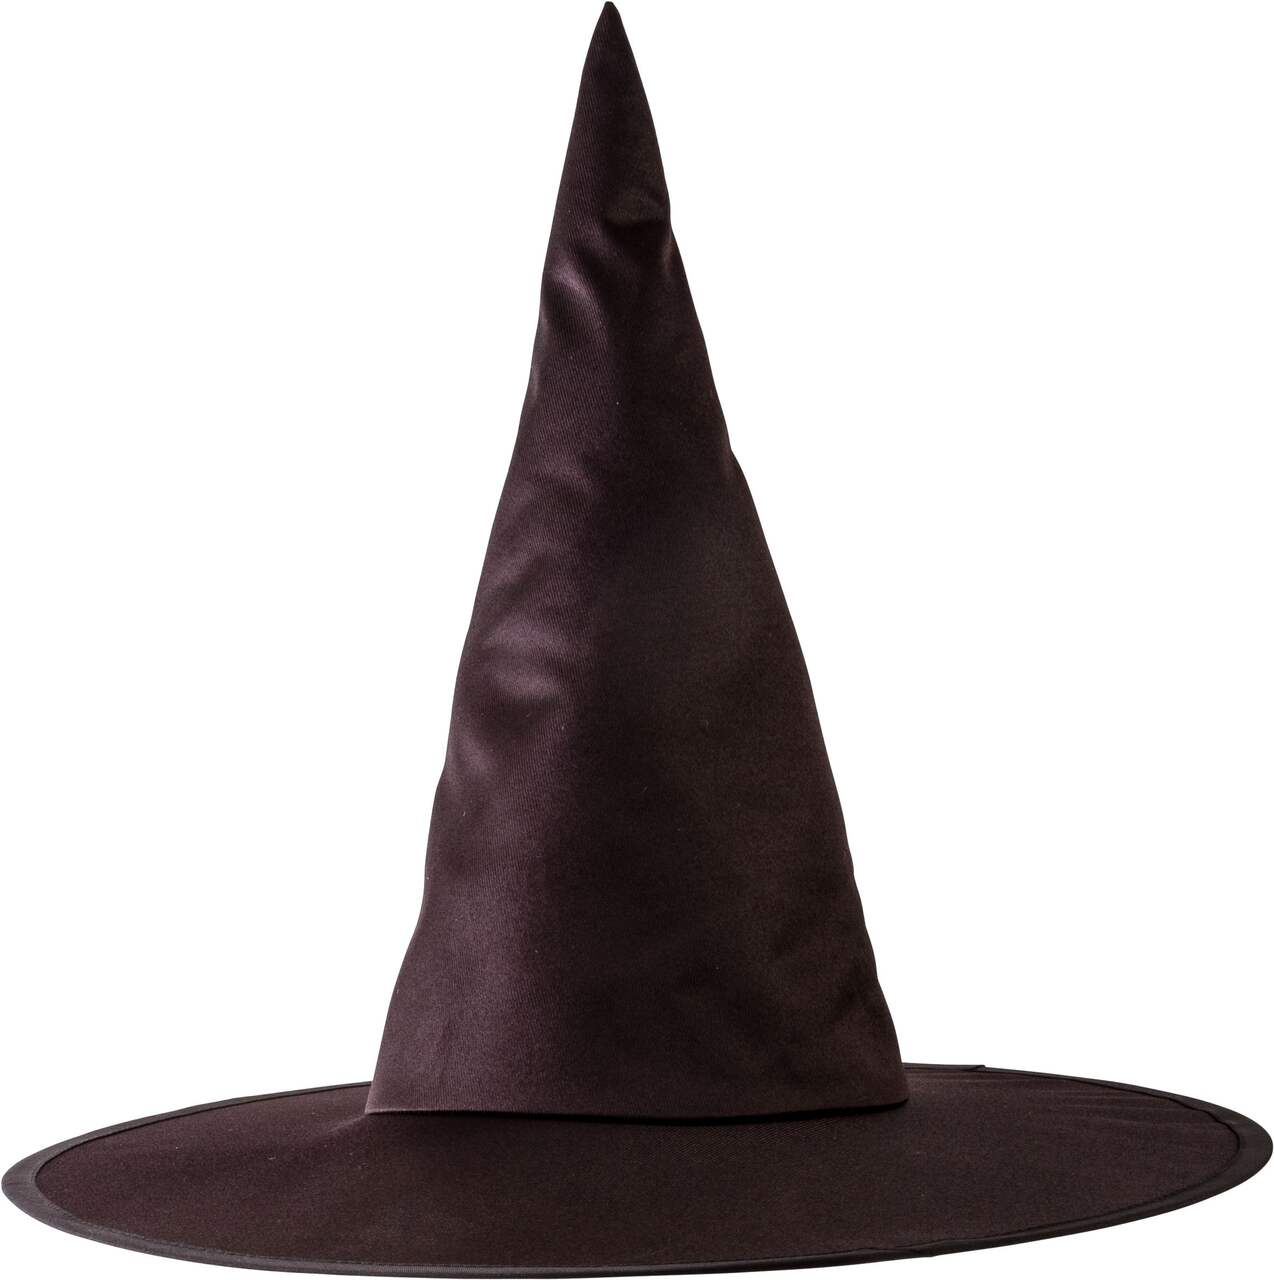 Witch Classic Pointy Hat, Black, One Size, Wearable Costume Accessory for  Halloween